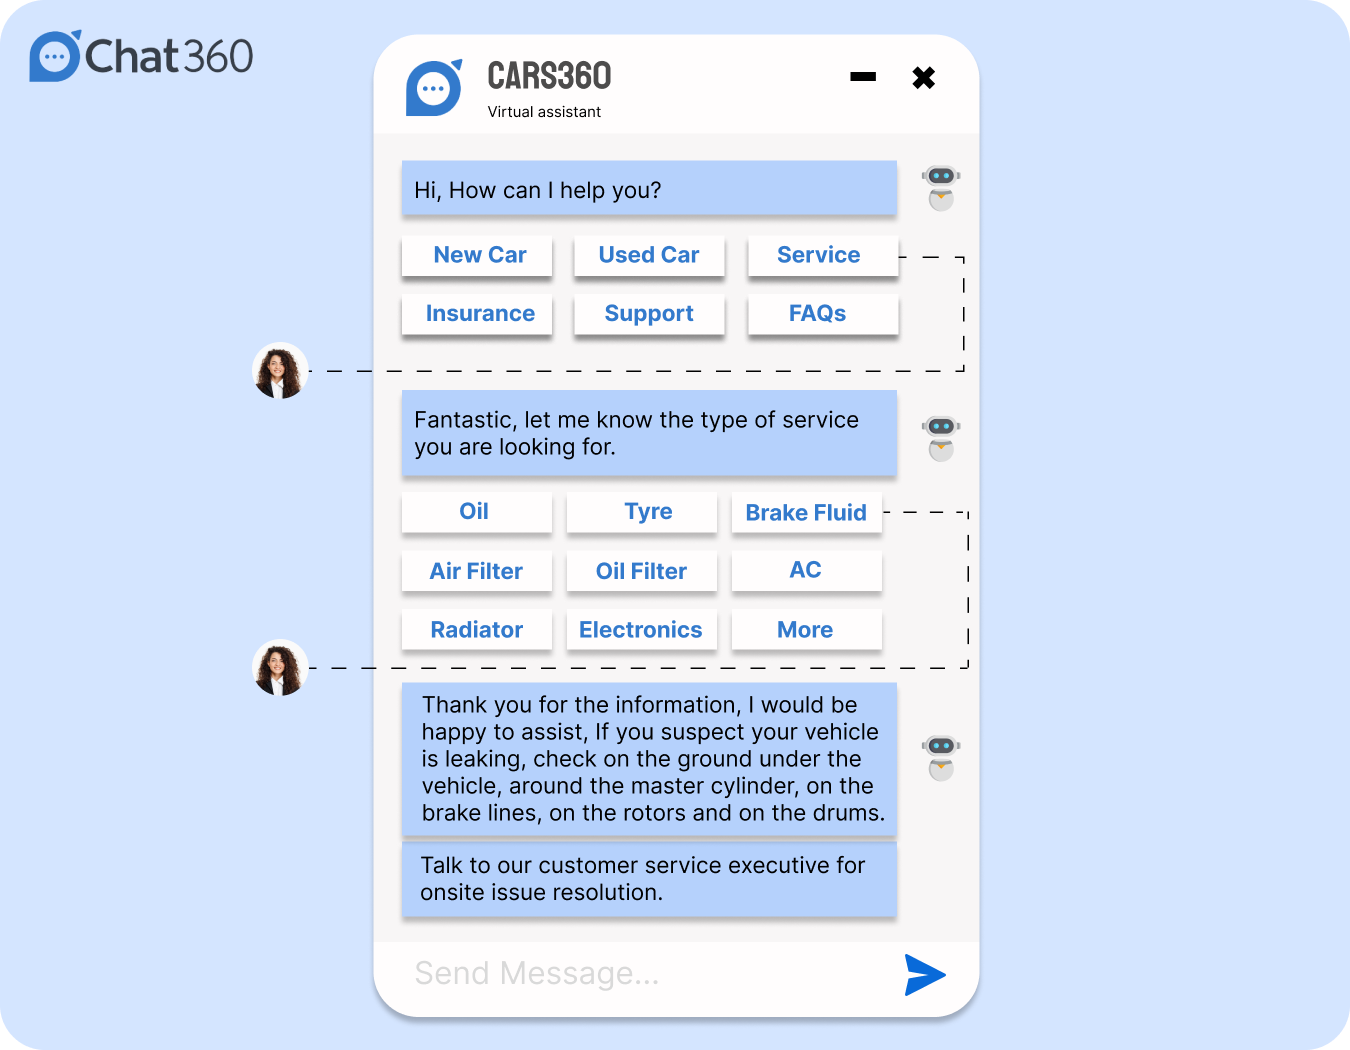 Chatbot assisting human for service related queries